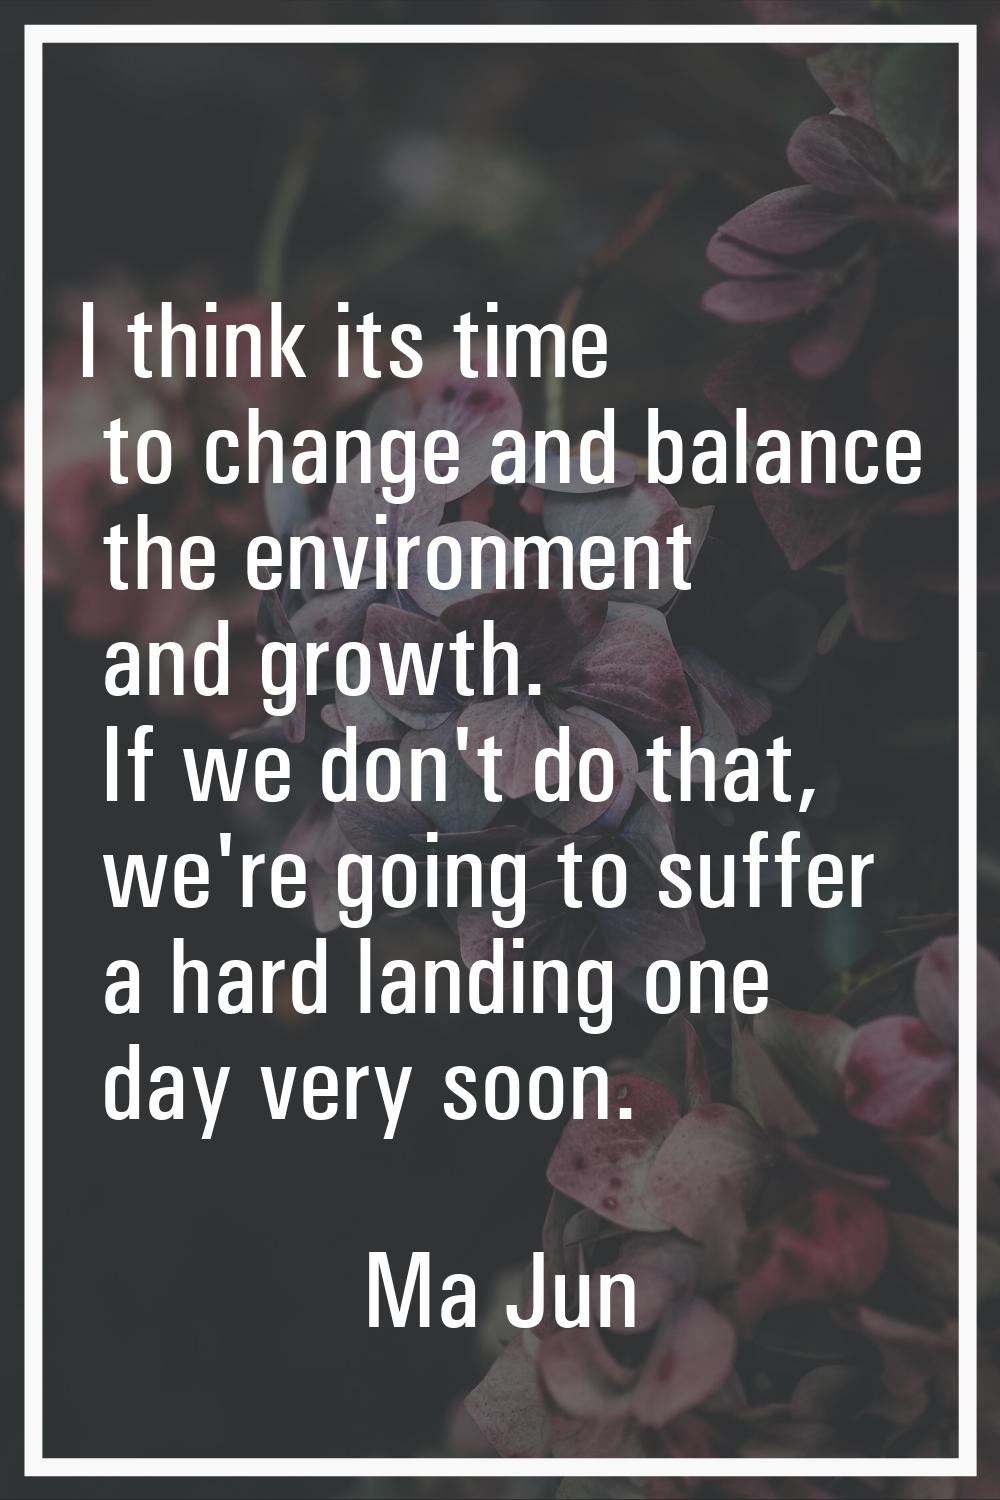 I think its time to change and balance the environment and growth. If we don't do that, we're going